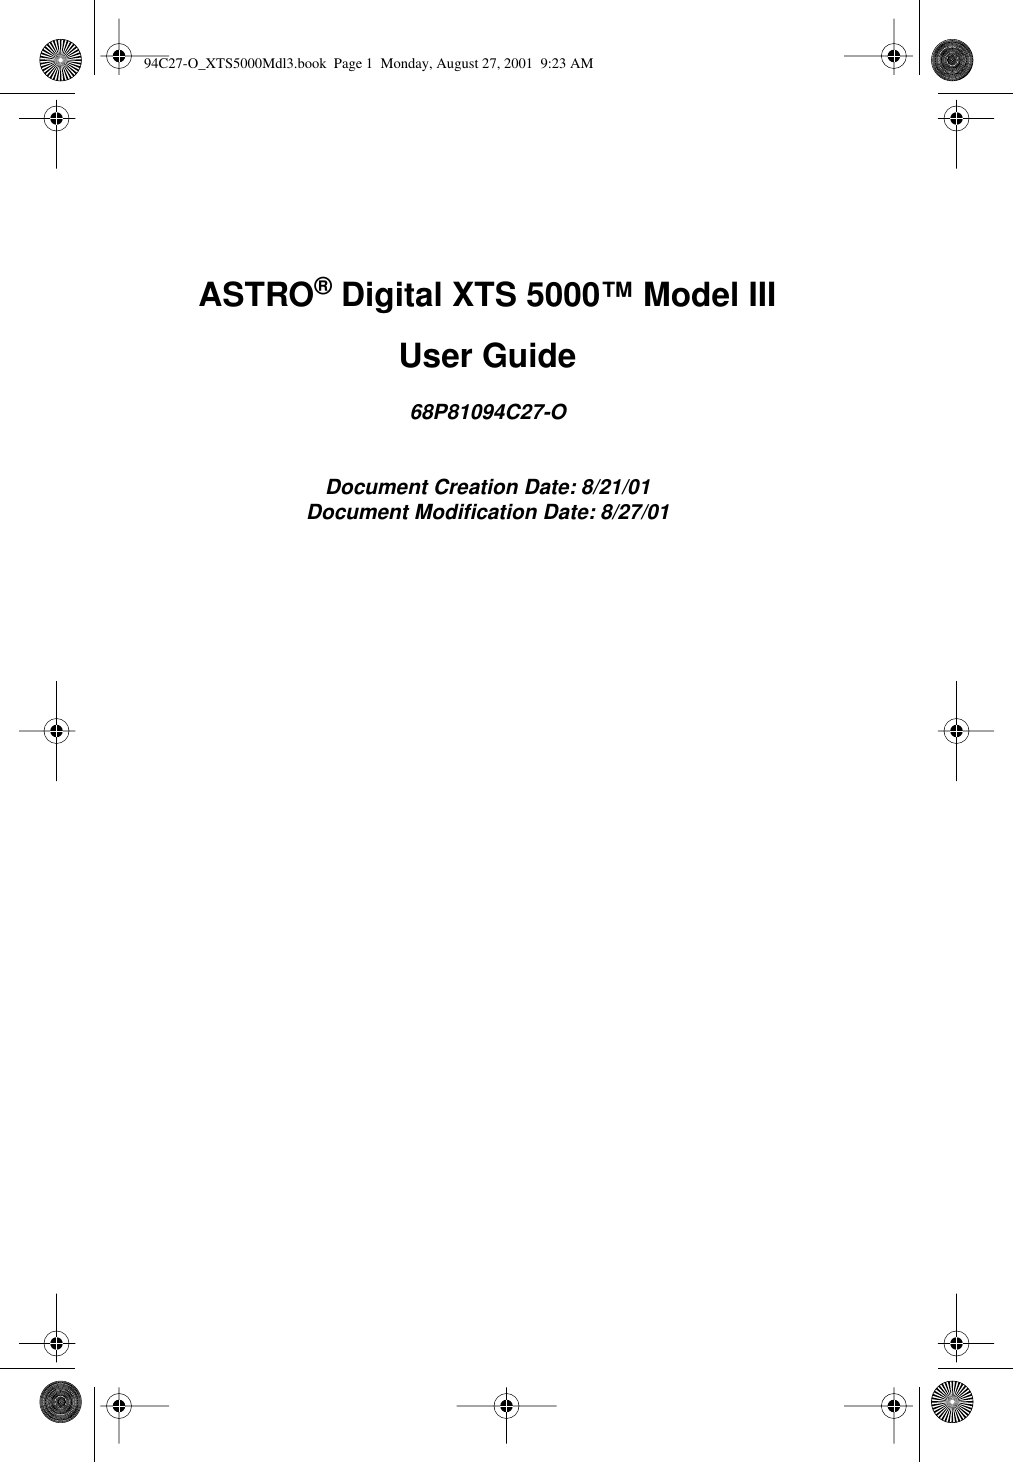  ASTRO ®  Digital XTS 5000™ Model III User Guide 68P81094C27-ODocument Creation Date: 8/21/01Document Modiﬁcation Date: 8/27/01 94C27-O_XTS5000Mdl3.book  Page 1  Monday, August 27, 2001  9:23 AM